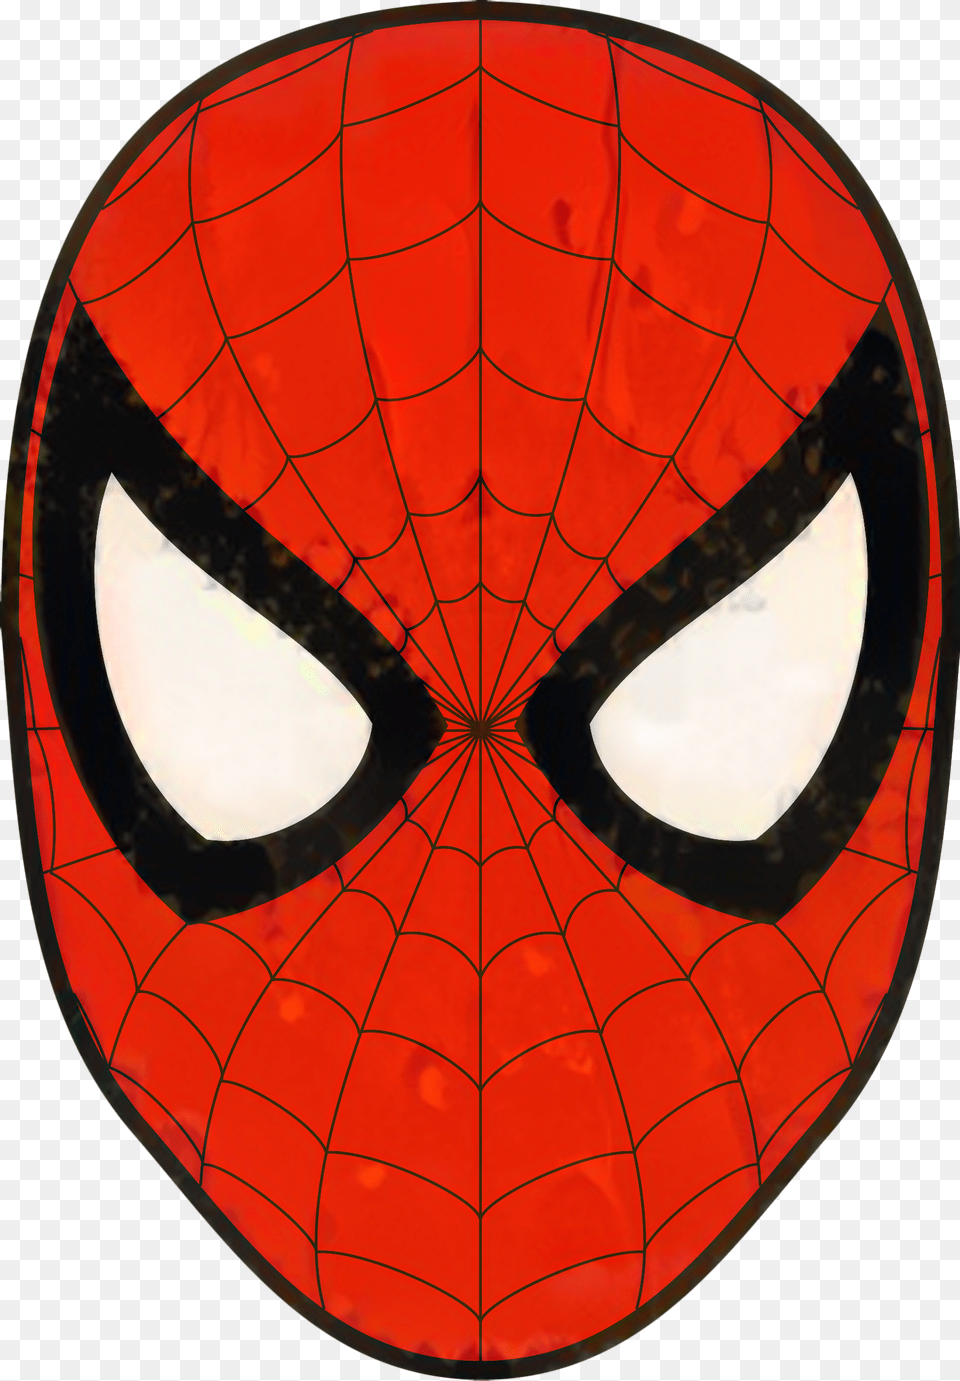 Spider Man Clip Art Portable Network Graphics Image Cartoon Spiderman Face, Mask Png